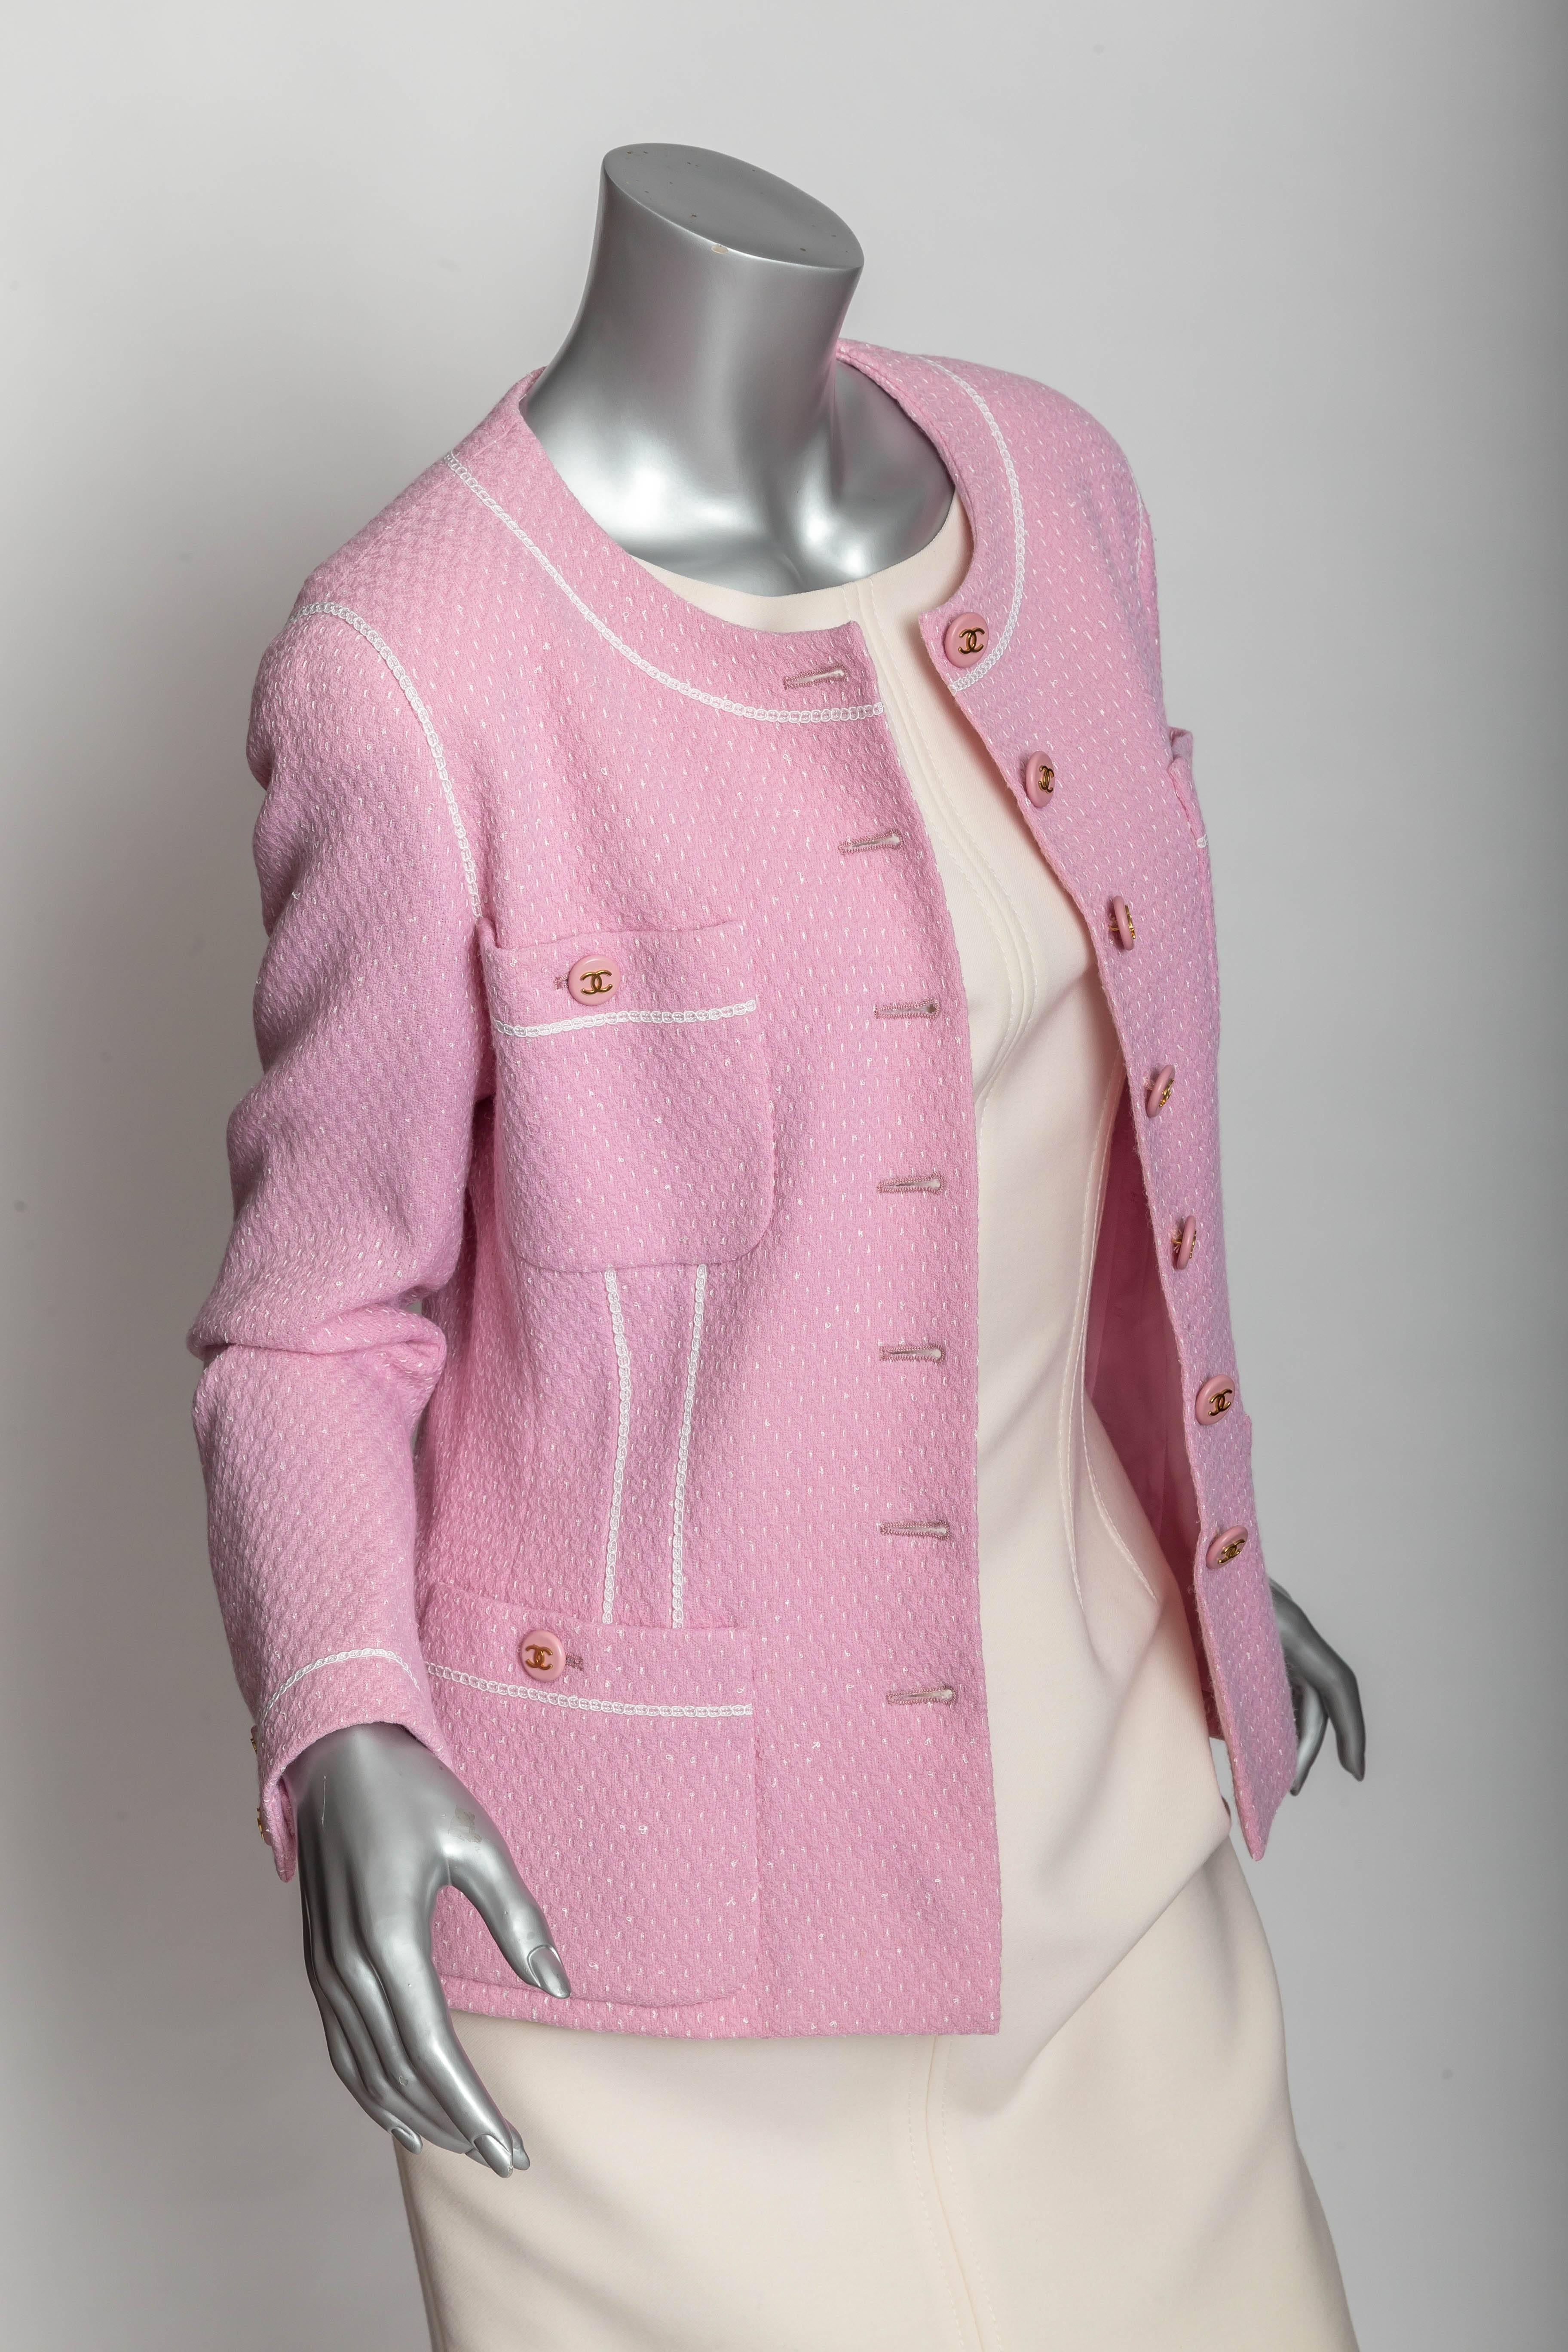 Chanel Jacket in Pink with Chanel Logo Buttons - 42 4